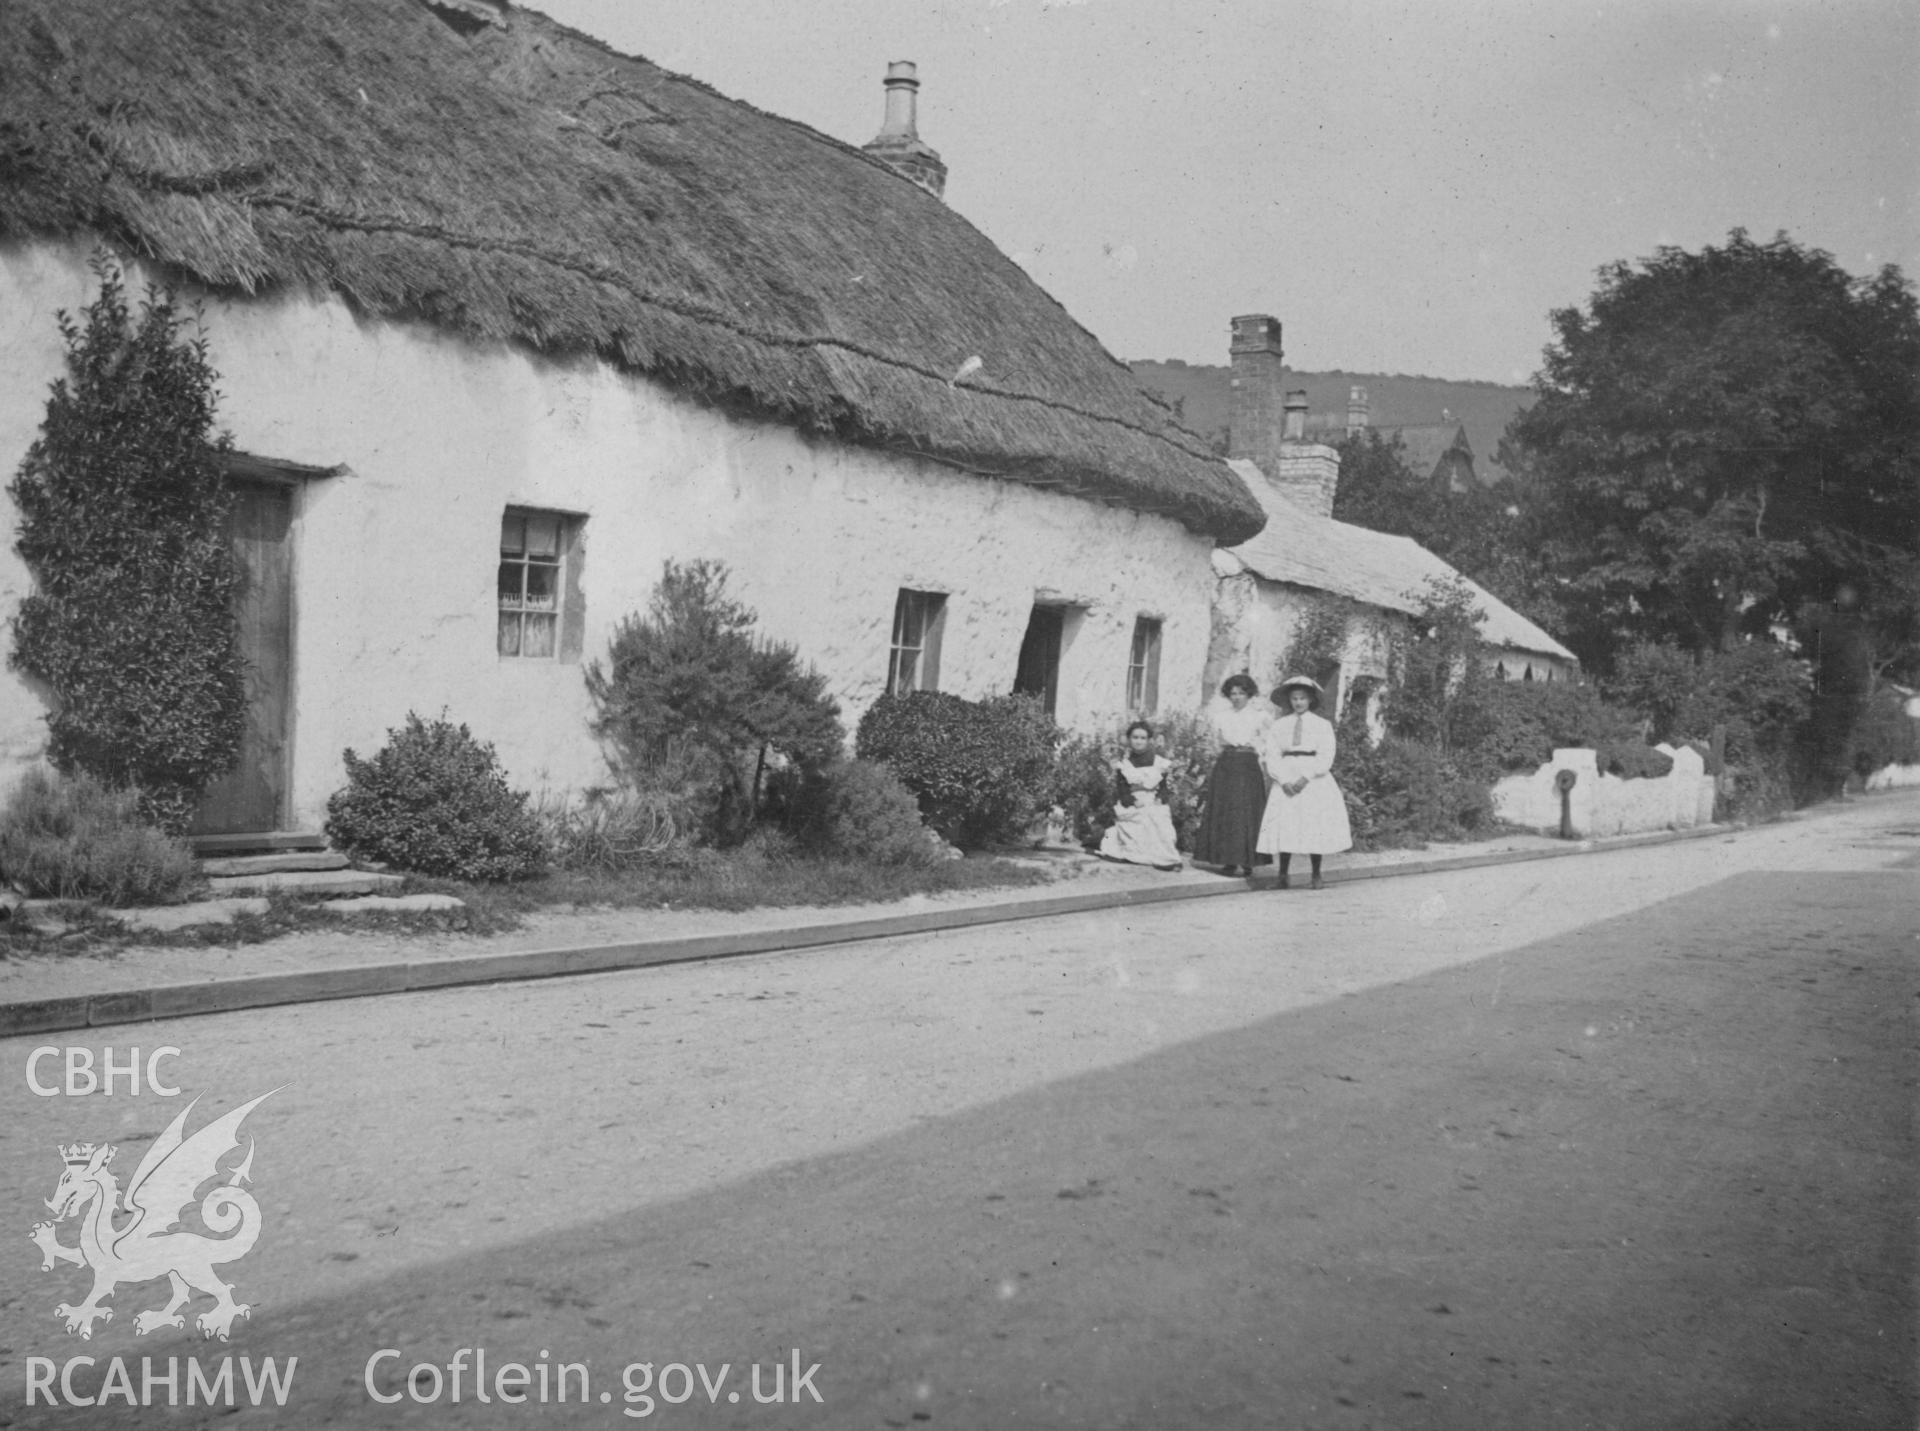 "1910 mud cottages Llangawsai Aberystwyth". Photo of three figures at the roadside. Digitised from a photograph album showing views of Aberystwyth and District, produced by David John Saer, school teacher of Aberystwyth. Loaned for copying by Dr Alan Chamberlain.